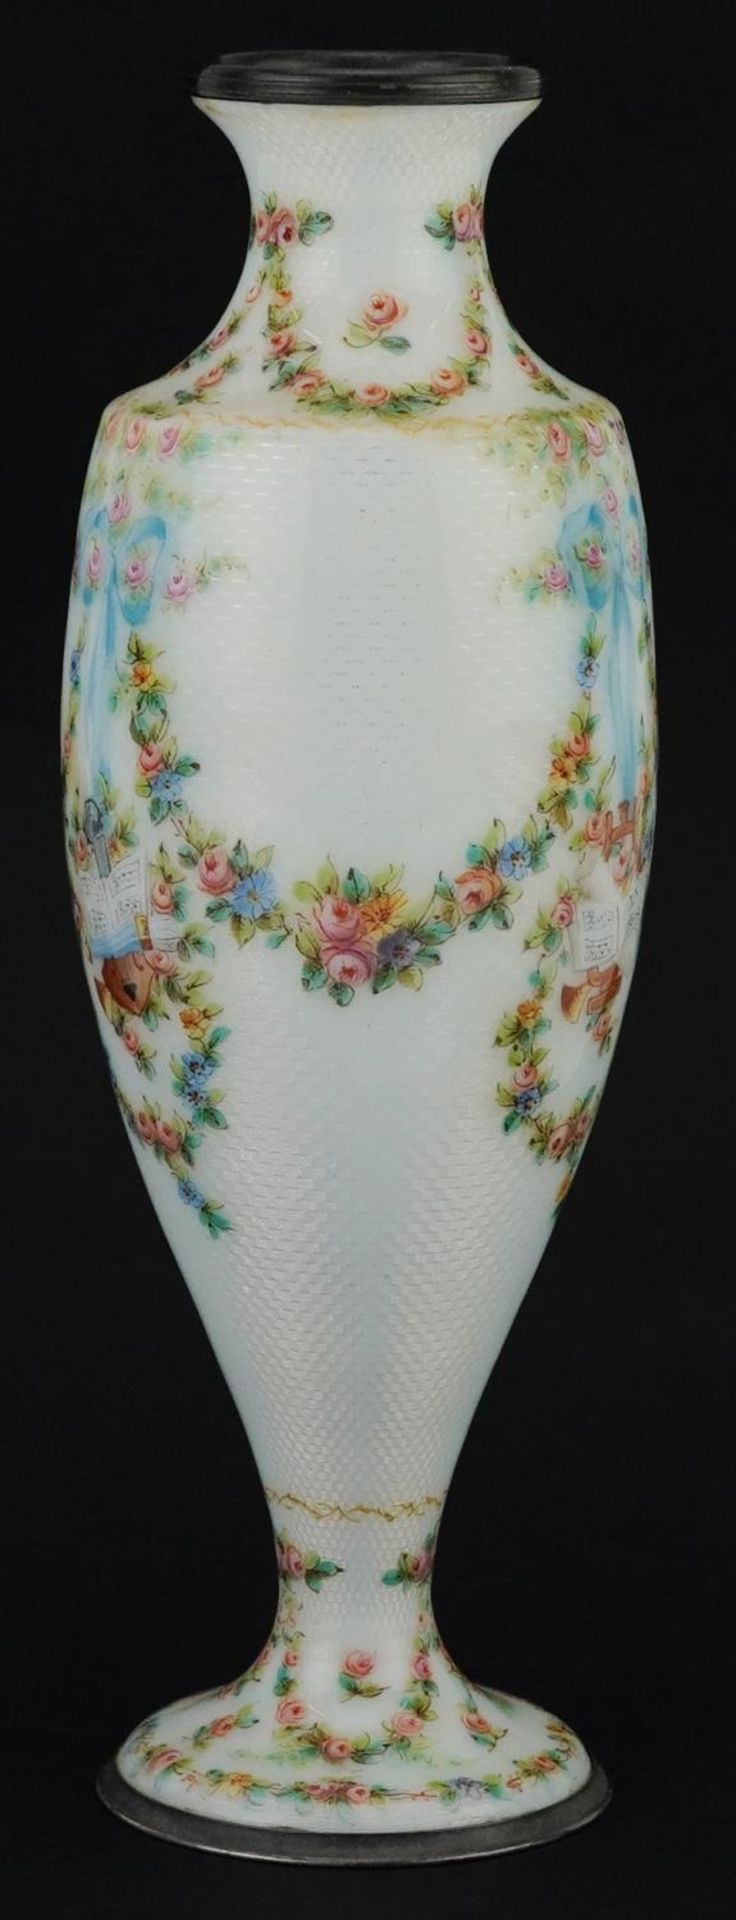 19th century French silver and white guilloche enamel vase finely hand painted with swags, ribbons - Image 3 of 10